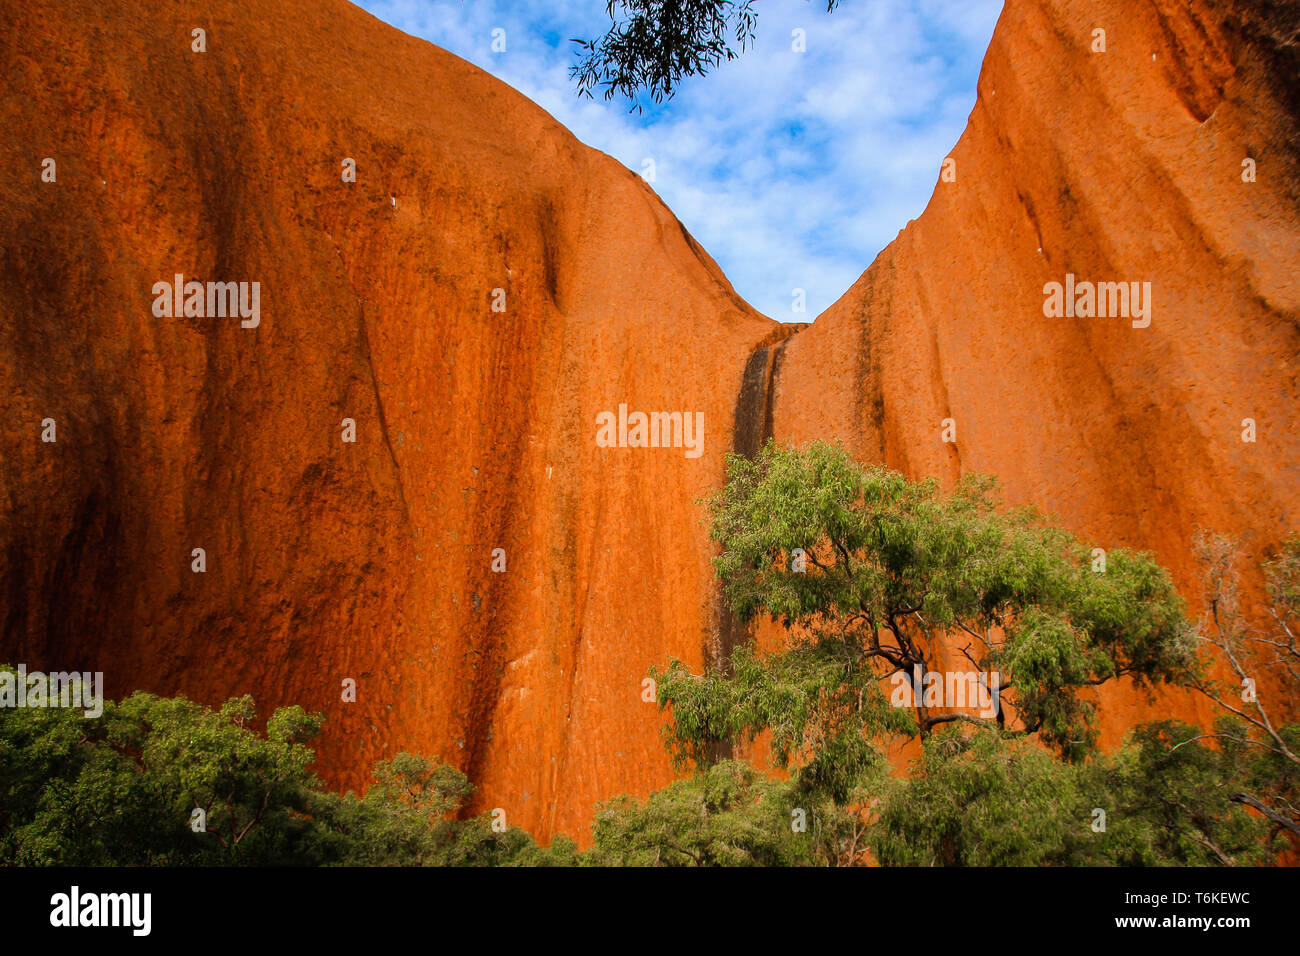 Rock Wall, Red Mountain Face Of The Ayers Rock, Uluru, In Central Australia Stock Photo